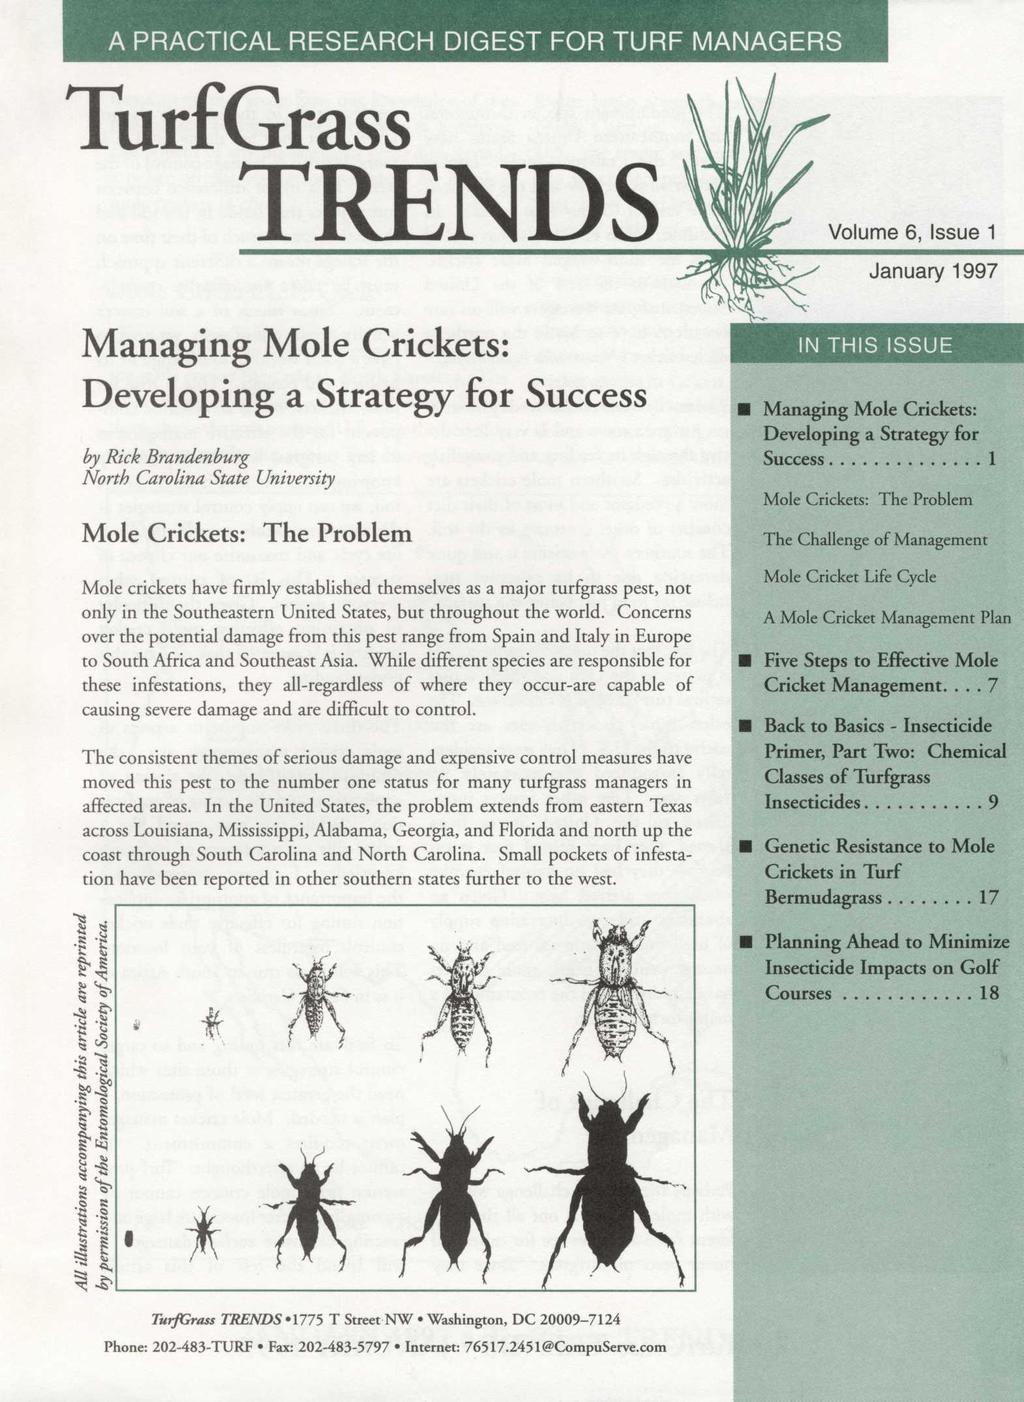 A PRACTICAL RESEARCH DIGEST FOR TURF MANAGERS TurfGrass TRENDS Volume Managing Mole Crickets: Developing a Strategy for Success by Rick Brandenburg North Carolina State University Mole Crickets: The